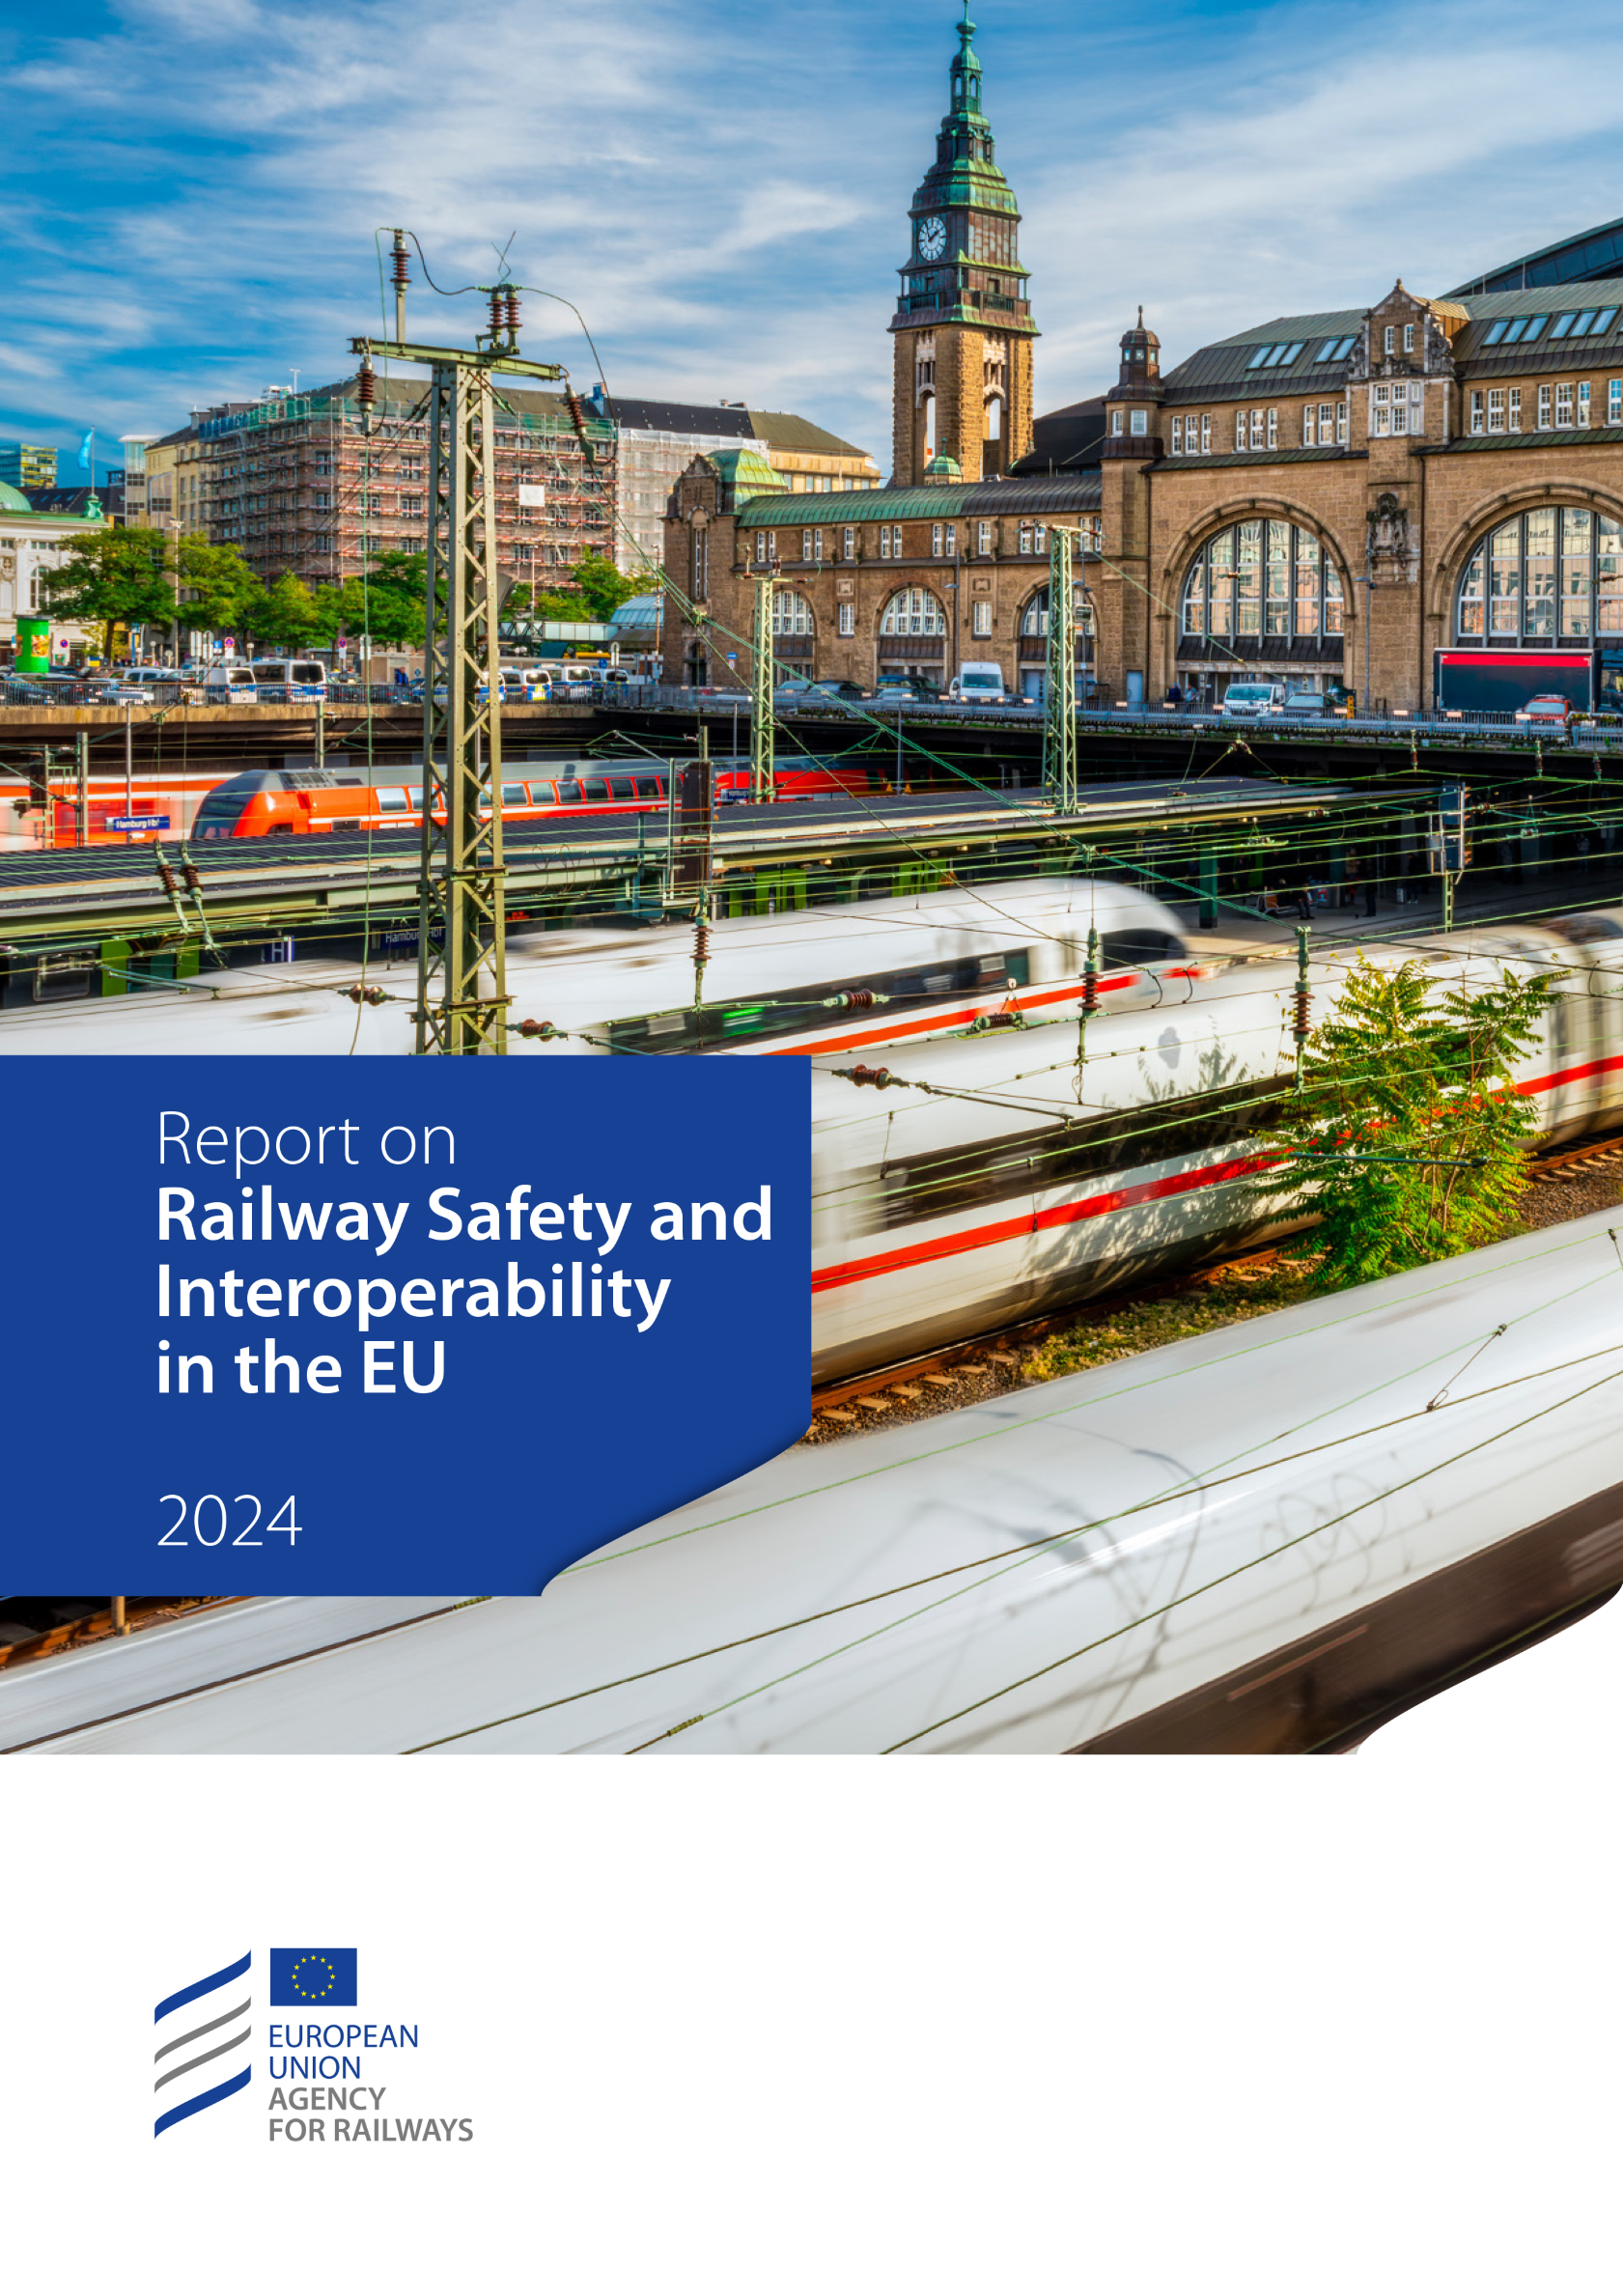 Report on Railway Safety and Interoperability in the EU 2024-1 sm.png